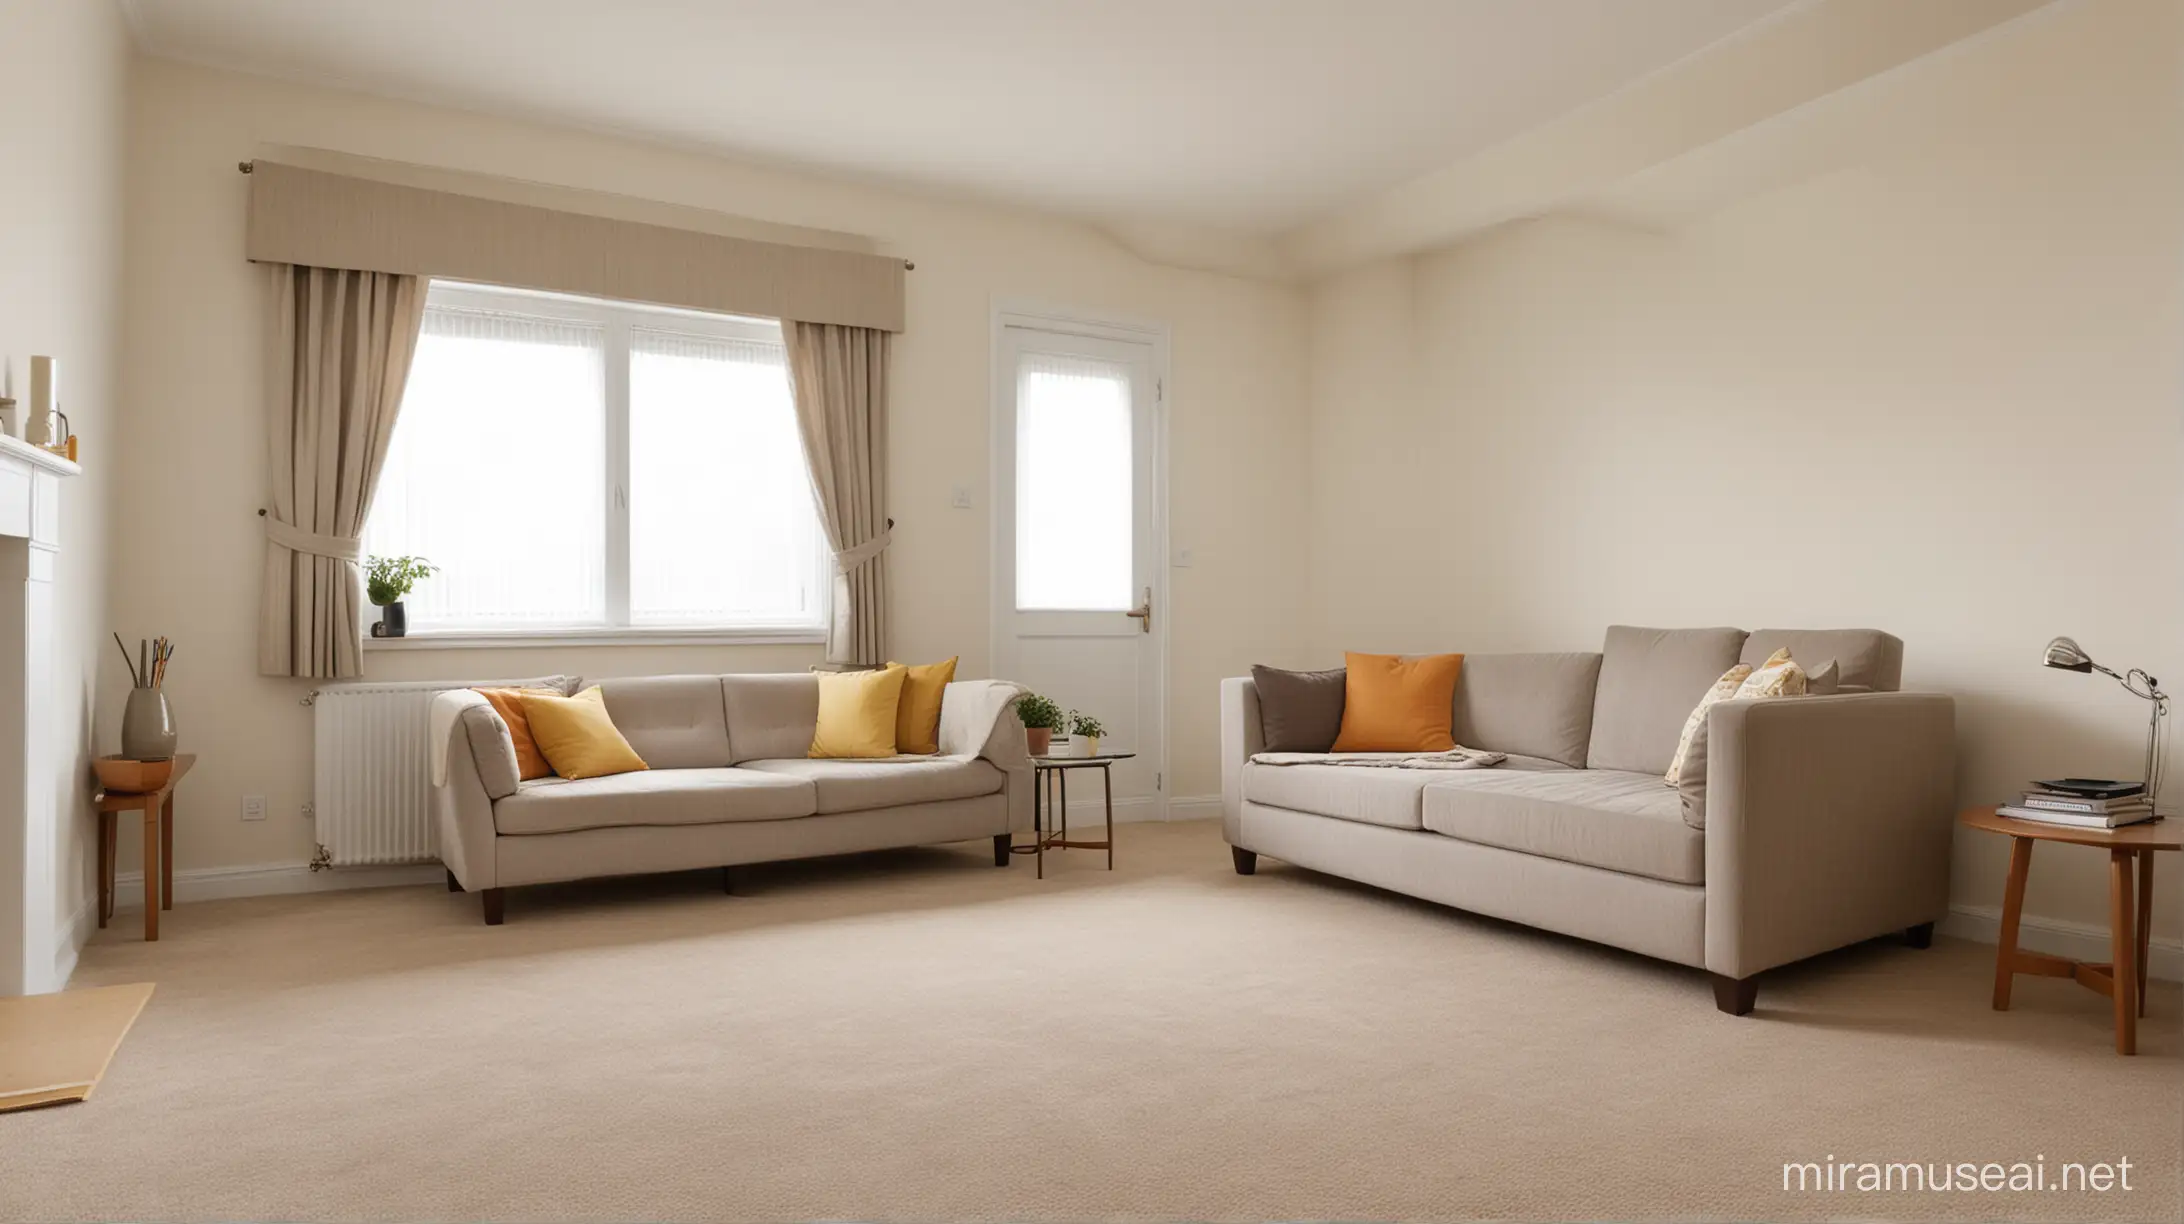 A simple living room with carpeted floor and a single sofa